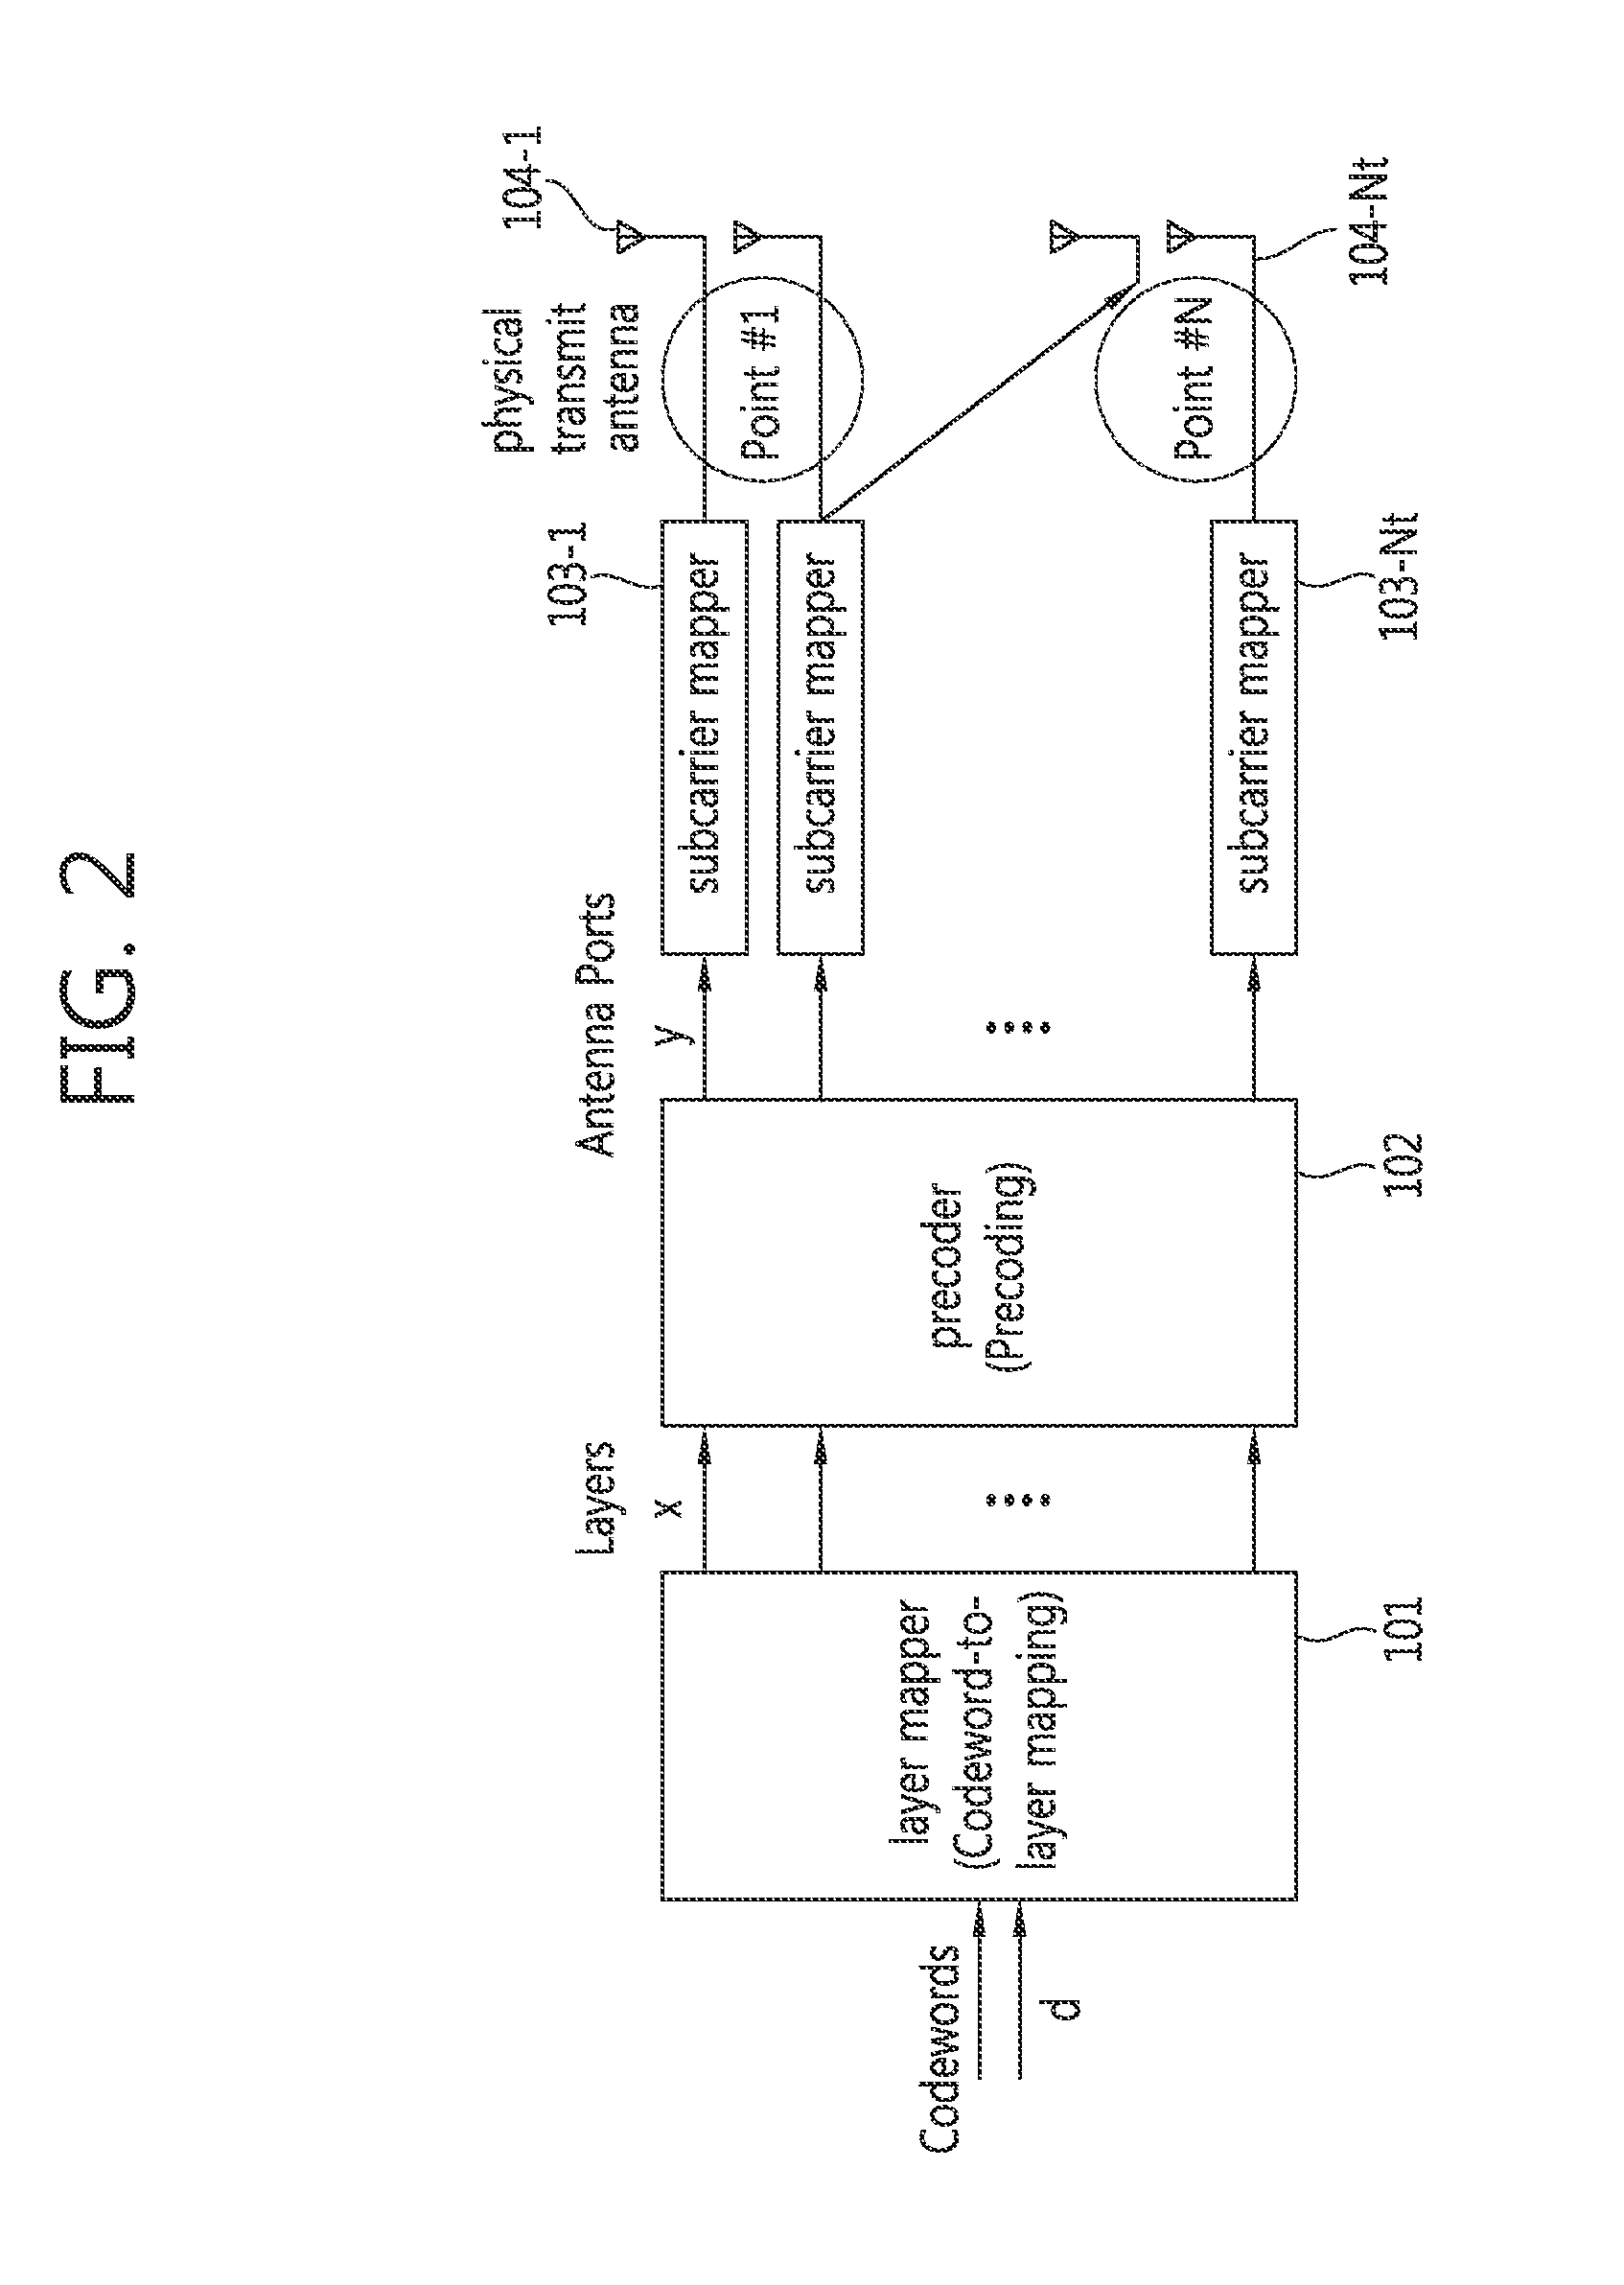 Signal transmitting method and device in a multi-node system